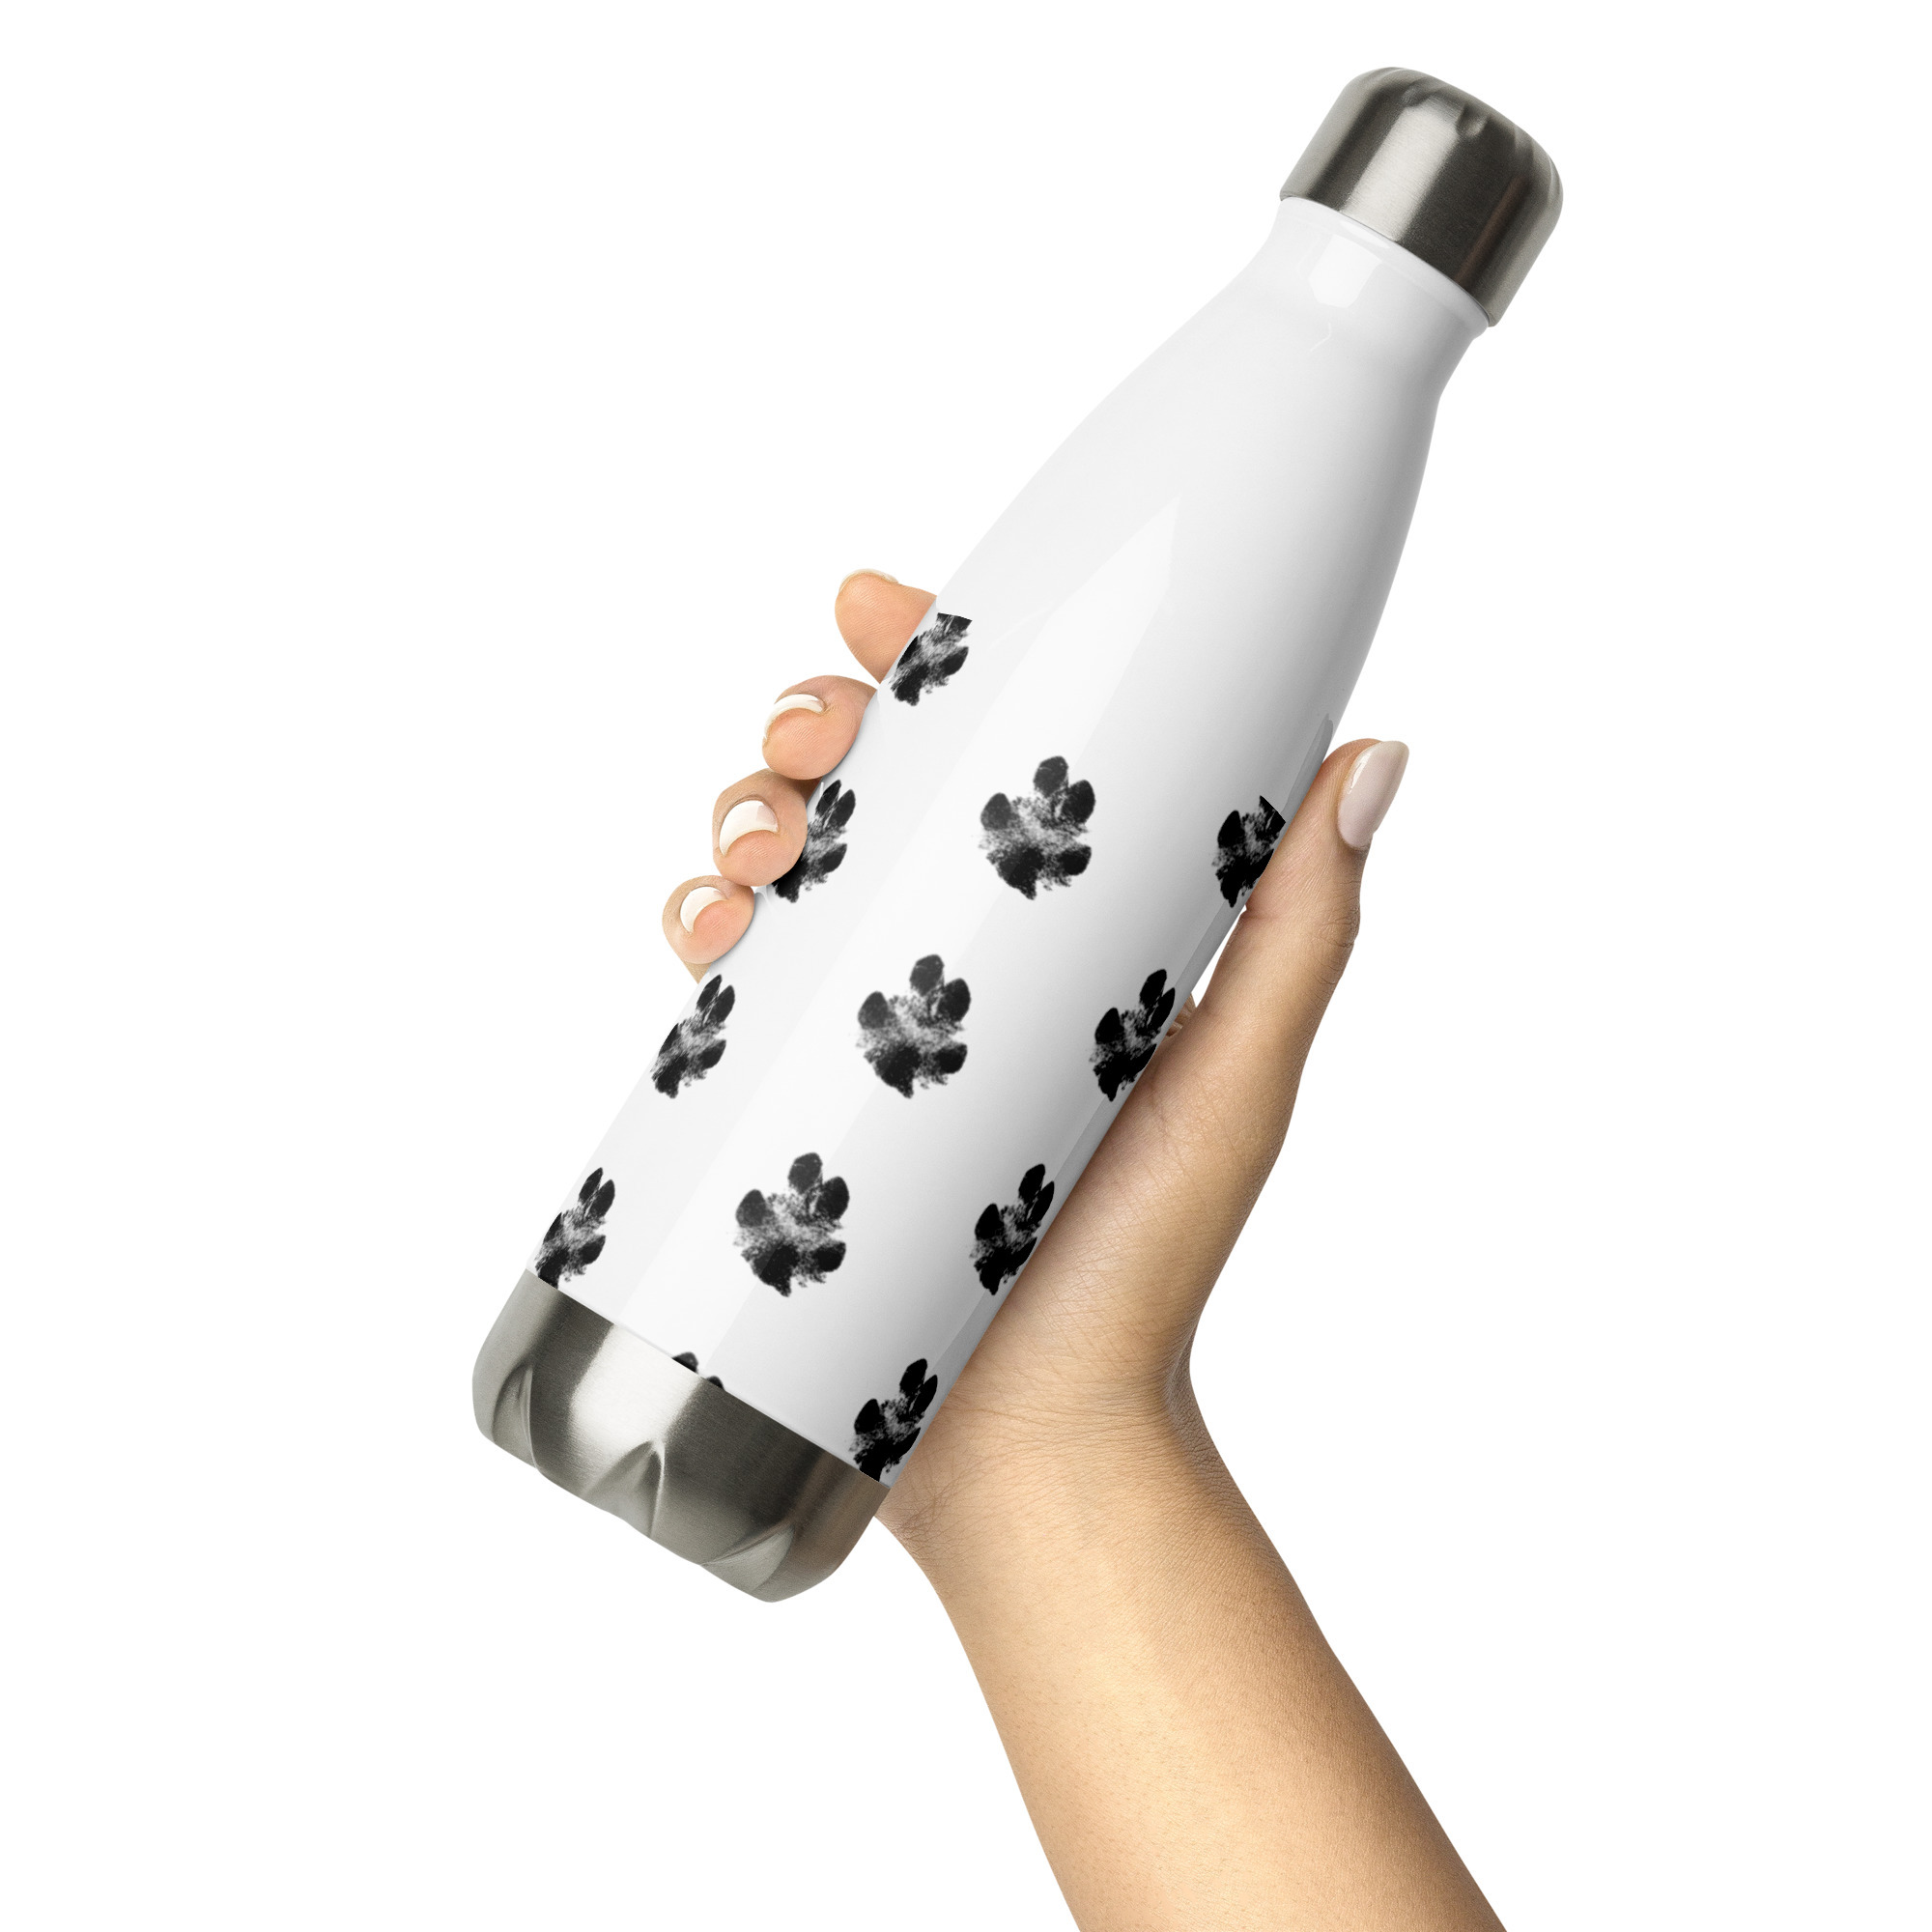 The Great Water Bottle Divide – Paw Print